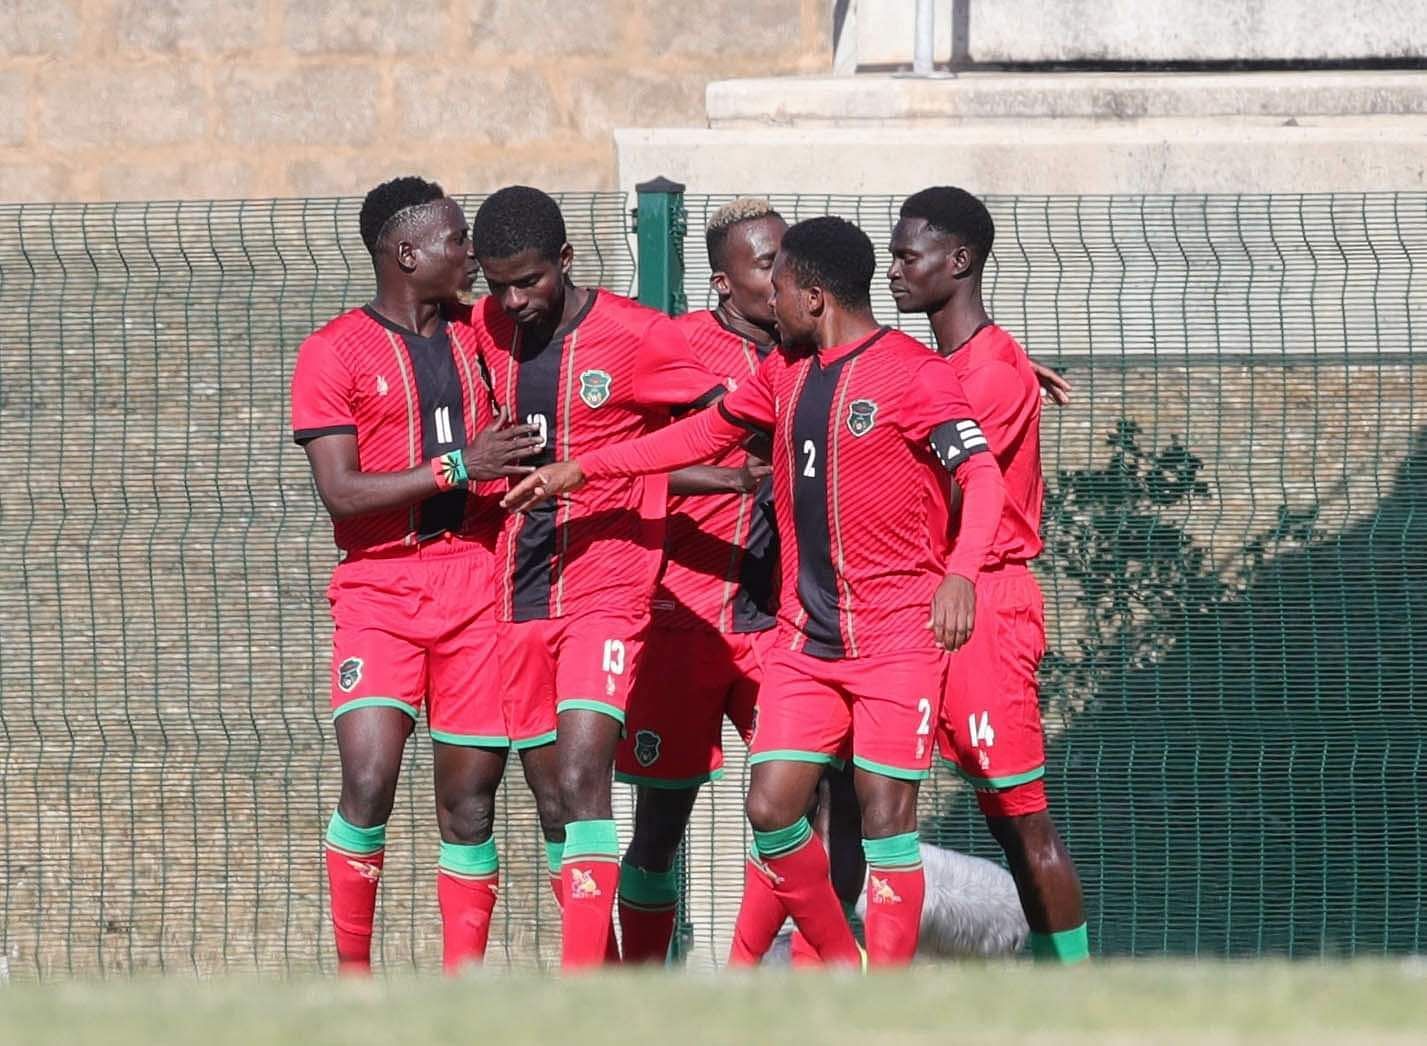 Malawi take on Mozambique in their final FIFA World Cup qualifying fixture on Tuesday